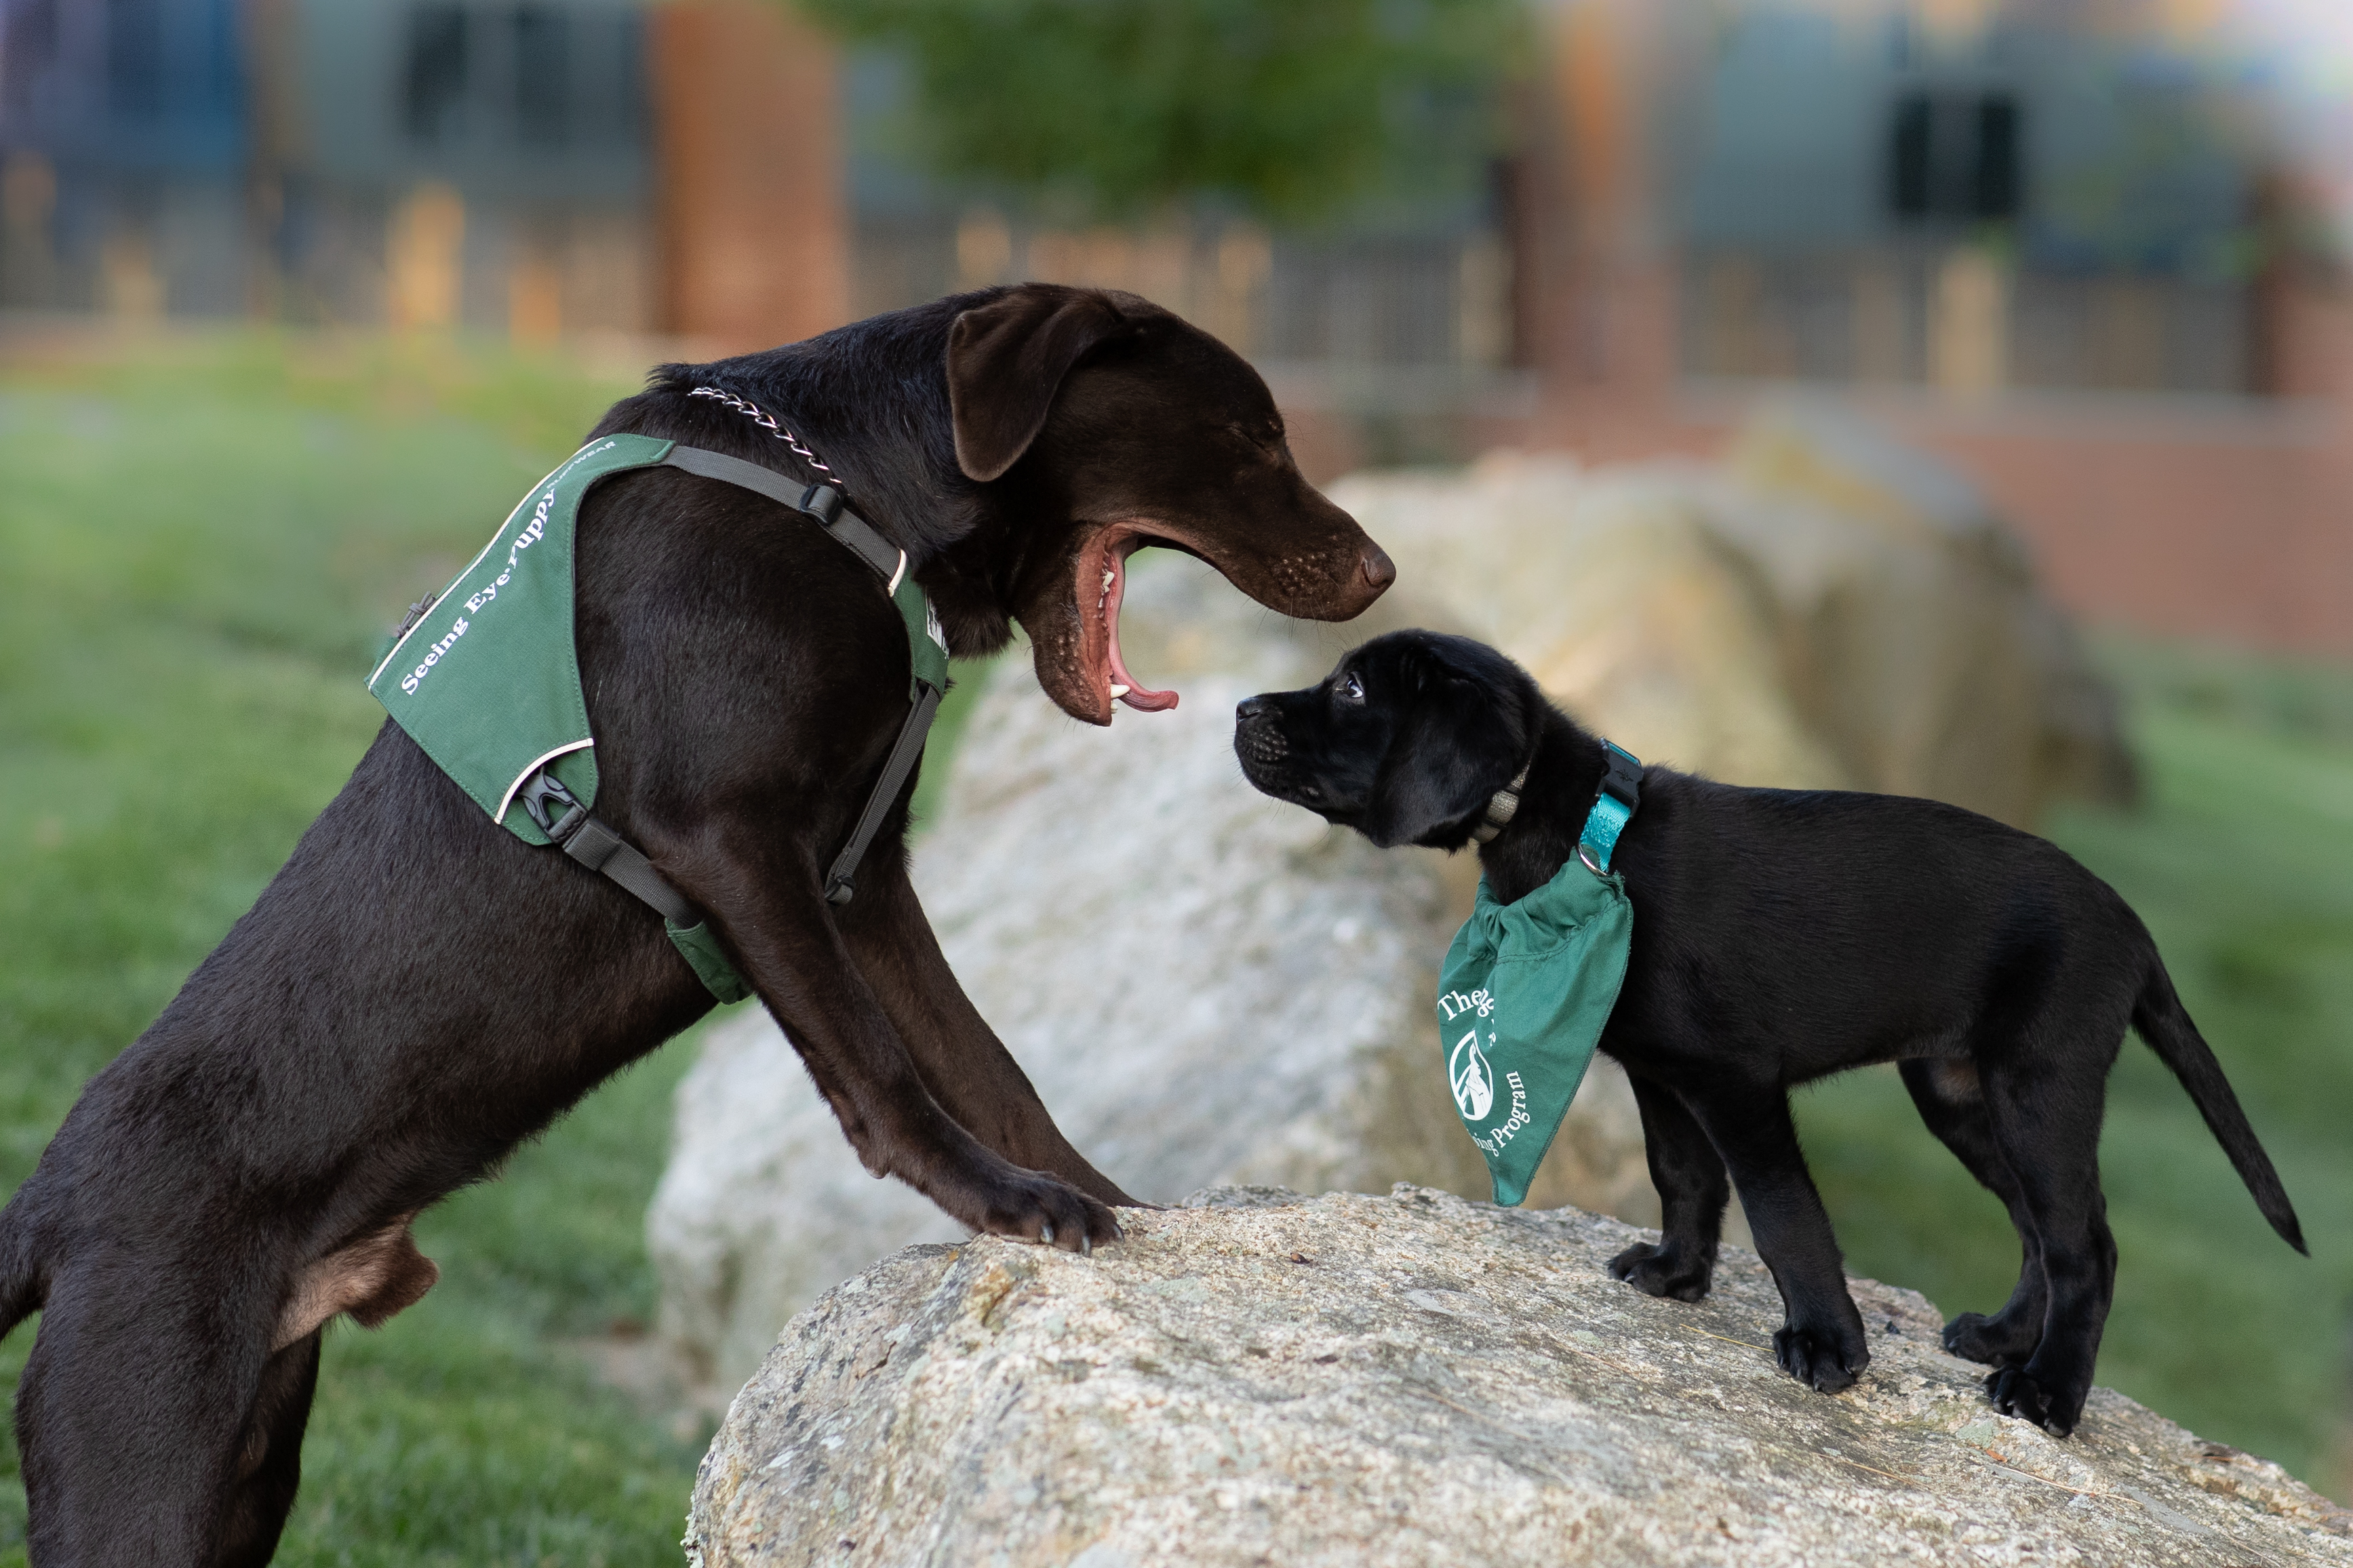 A small black Lab puppy stands on top of a large rock facing a more fully grown chocolate Lab who has its front paws up on the rock. The chocolate Lab is yawning widely with its mouth just inches from the black Lab’s face. The black Lab looks up into the other dog’s mouth. Both dogs are wearing Seeing Eye puppy vests.